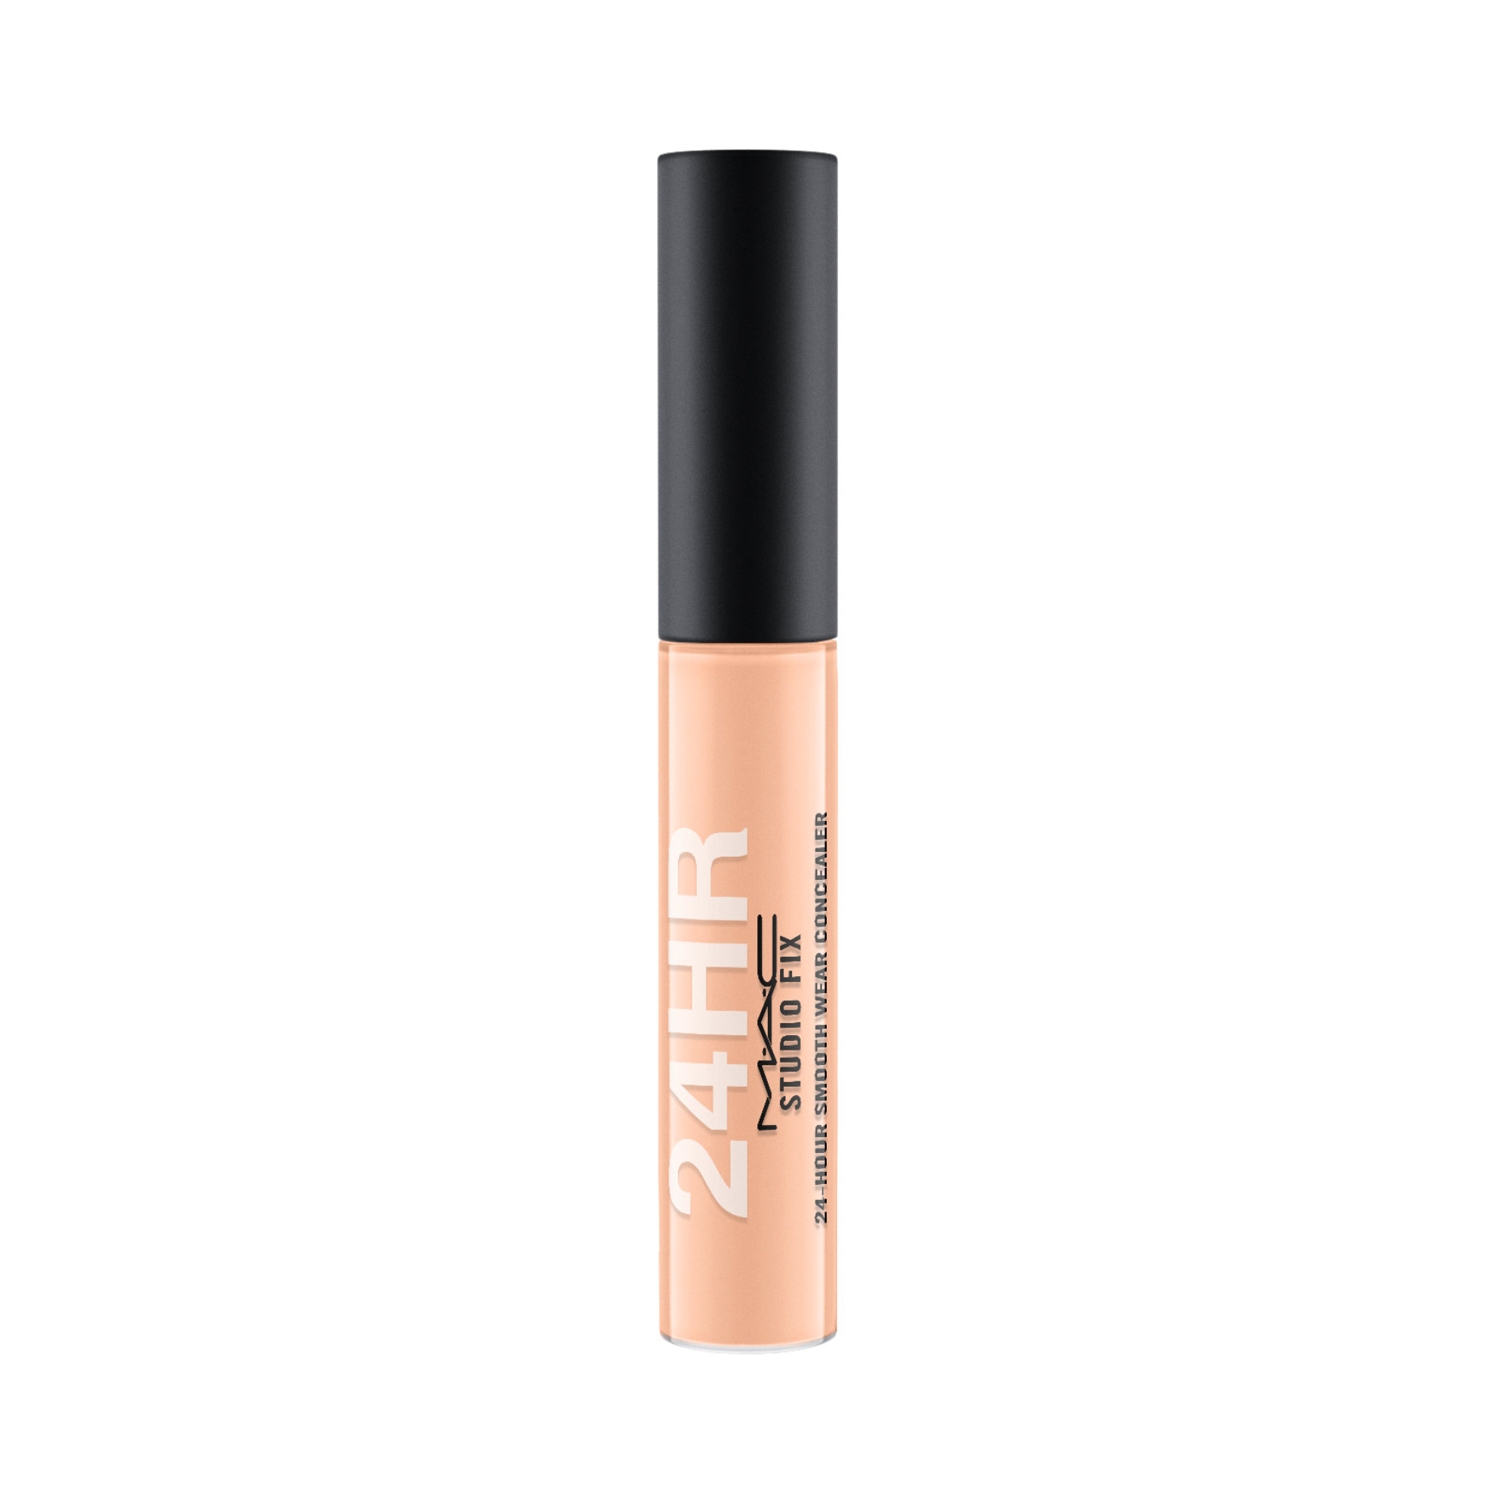 M.A.C | M.A.C Studio Fix 24-Hour Smooth Wear Concealer - NW32 (7ml)